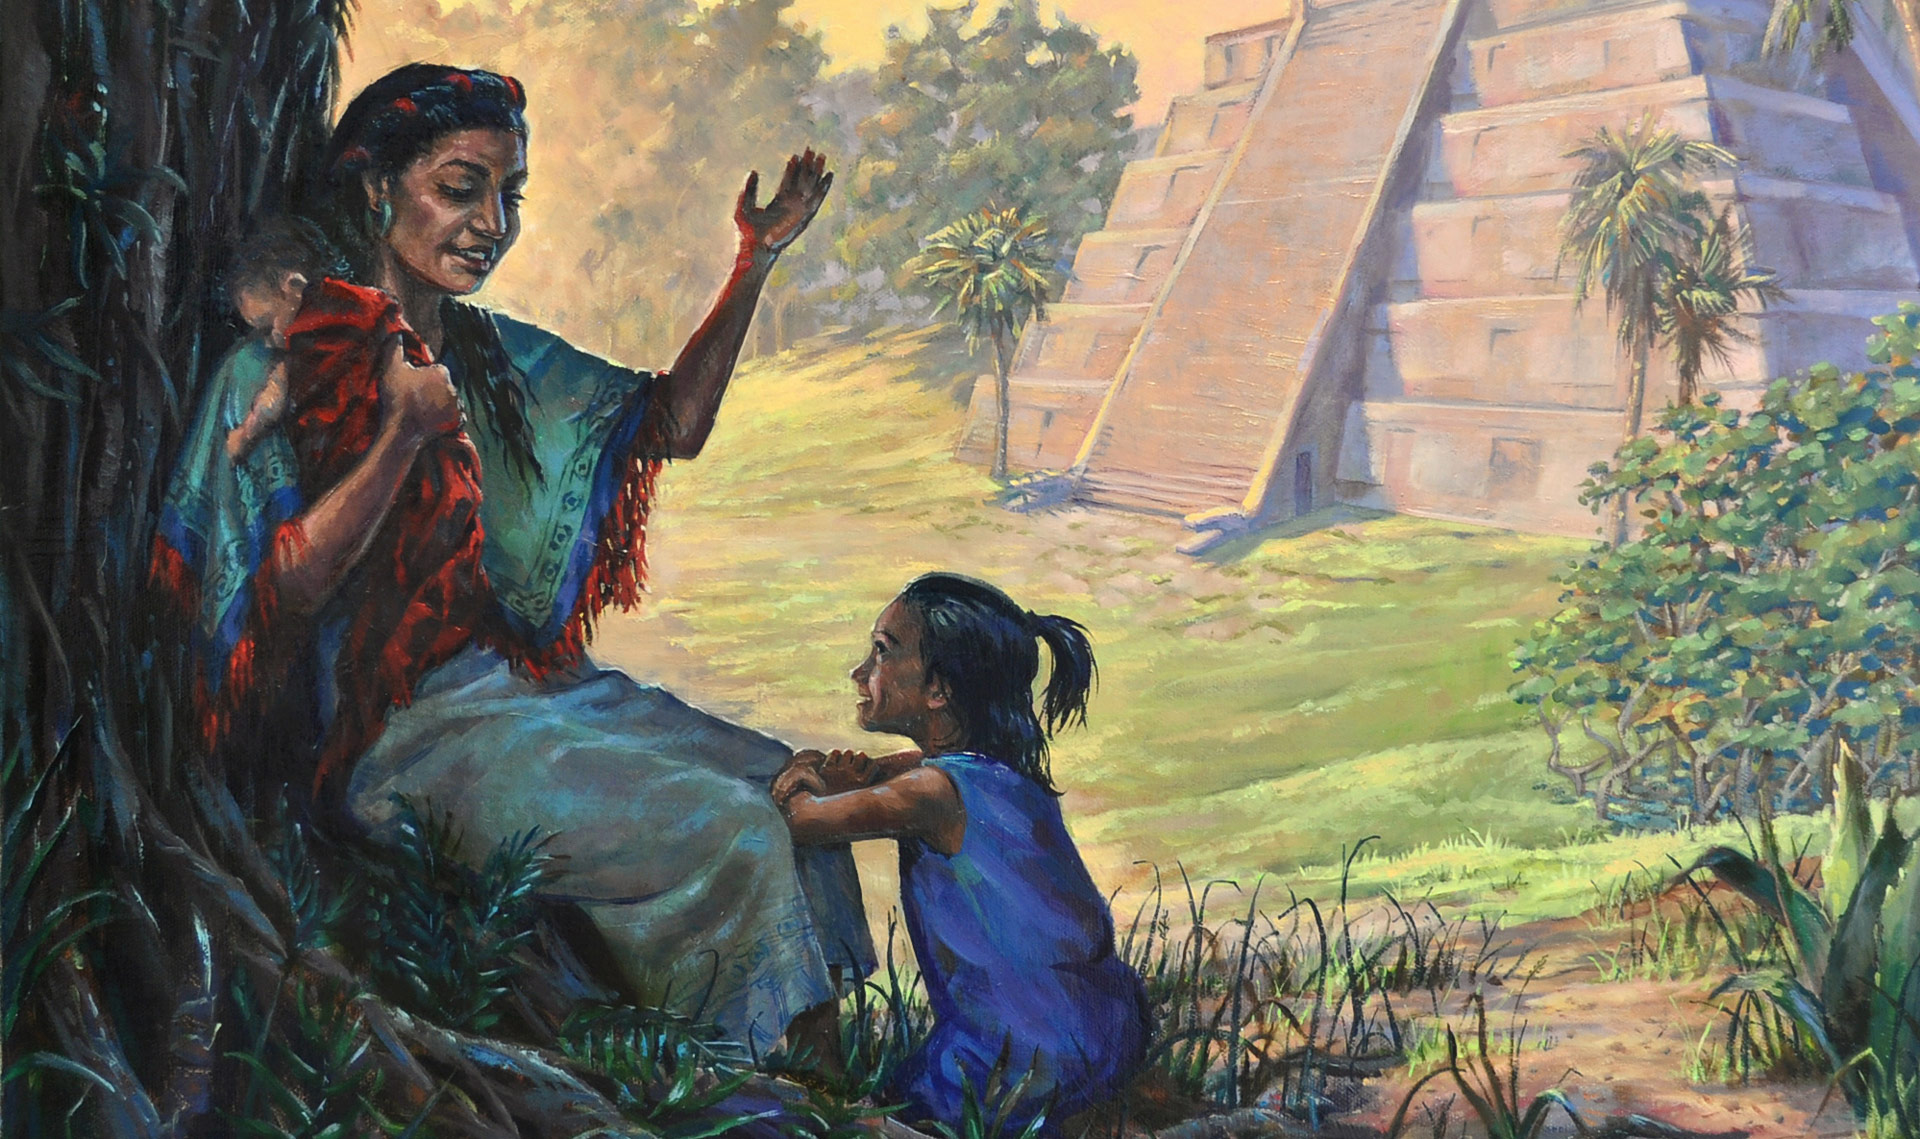 Mother Tell Me, by Megan Riecker, submitted to the 2018 Book of Mormon Central Art Contest.